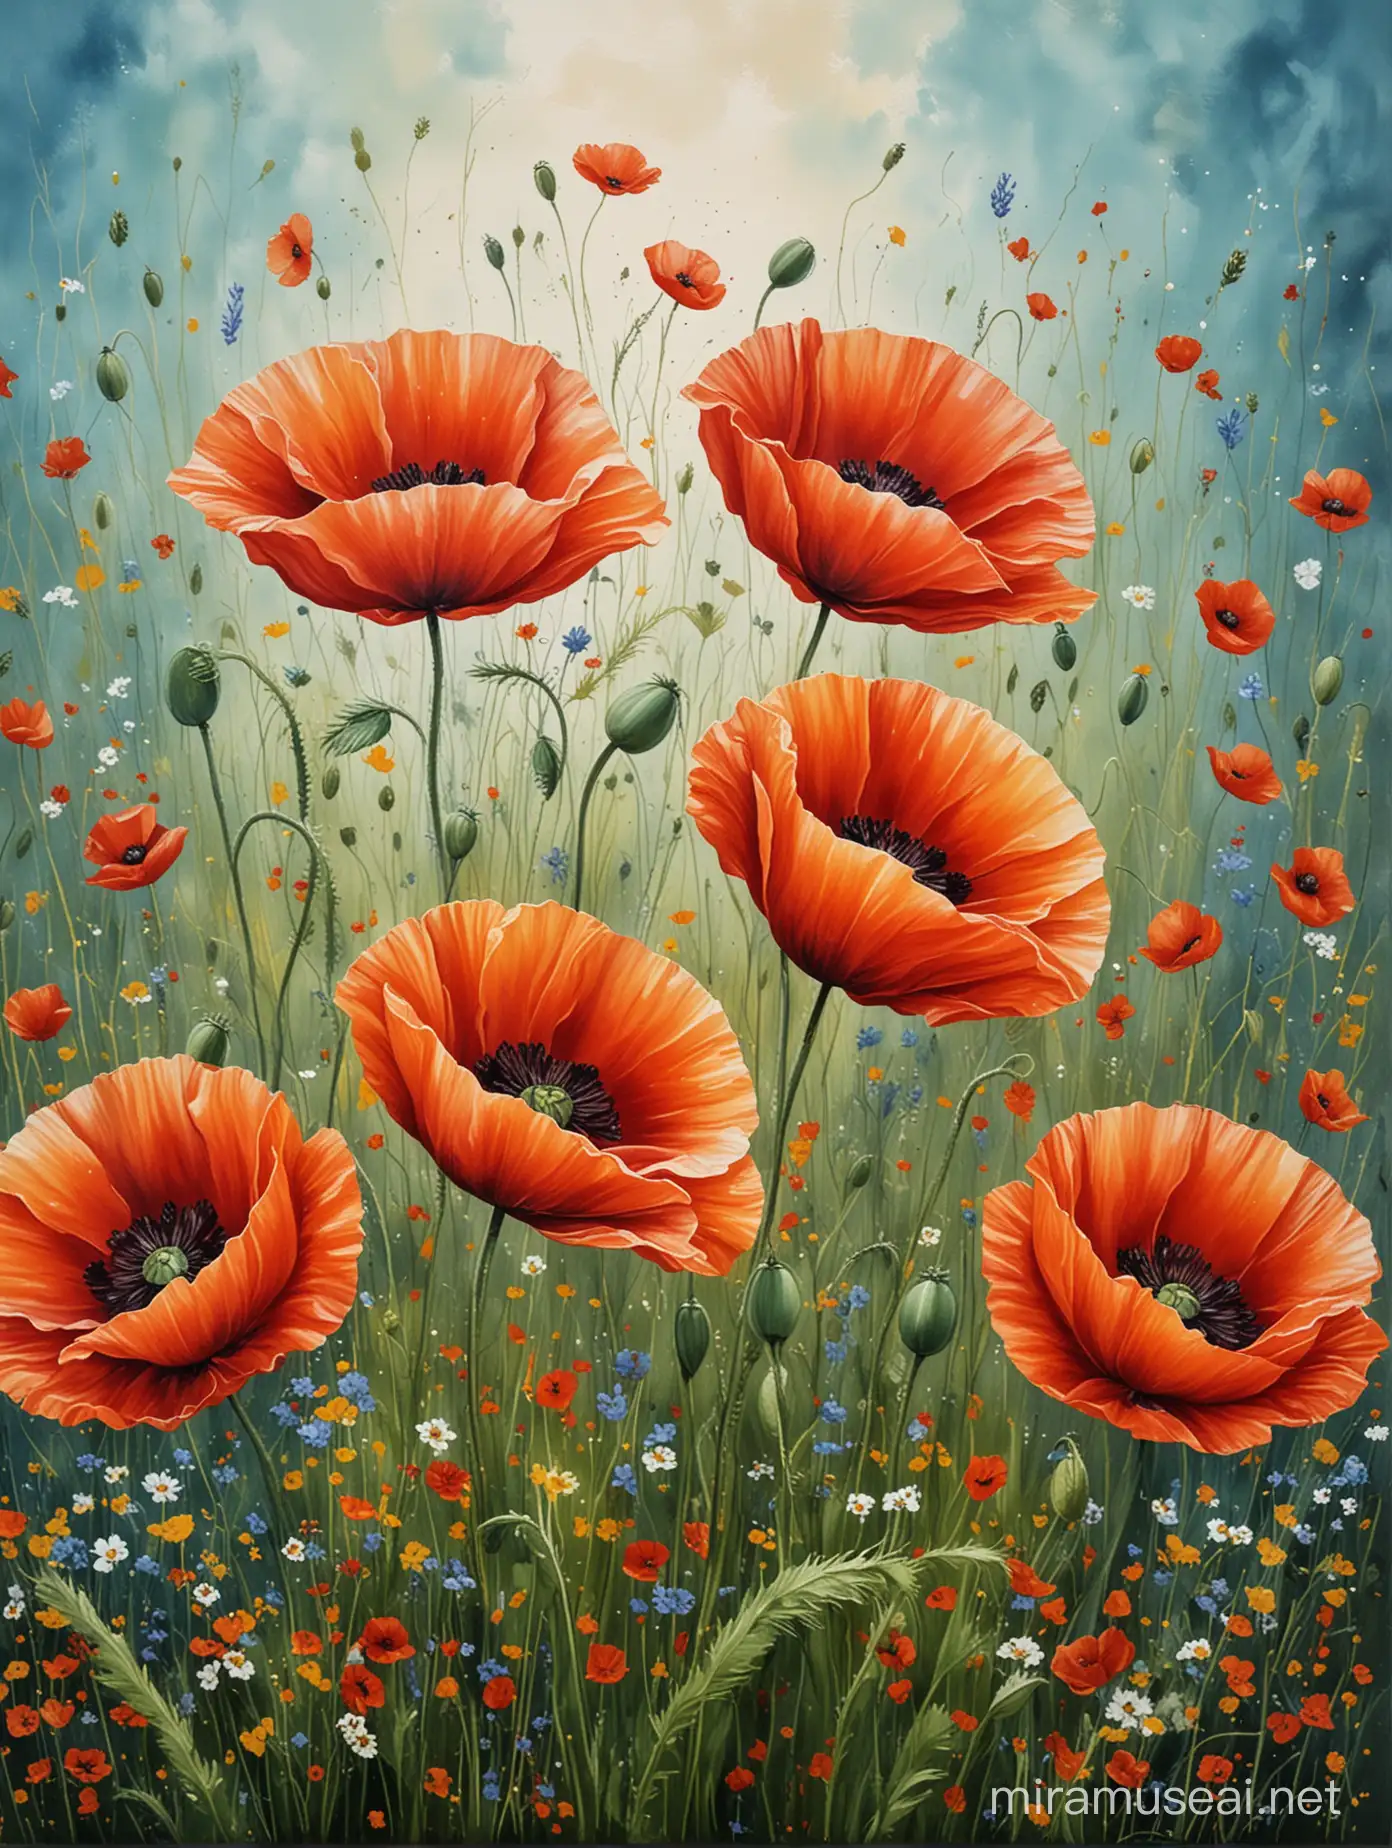 Vibrant Field of Red Poppies Painting Capturing Natures Beauty in Floral Art